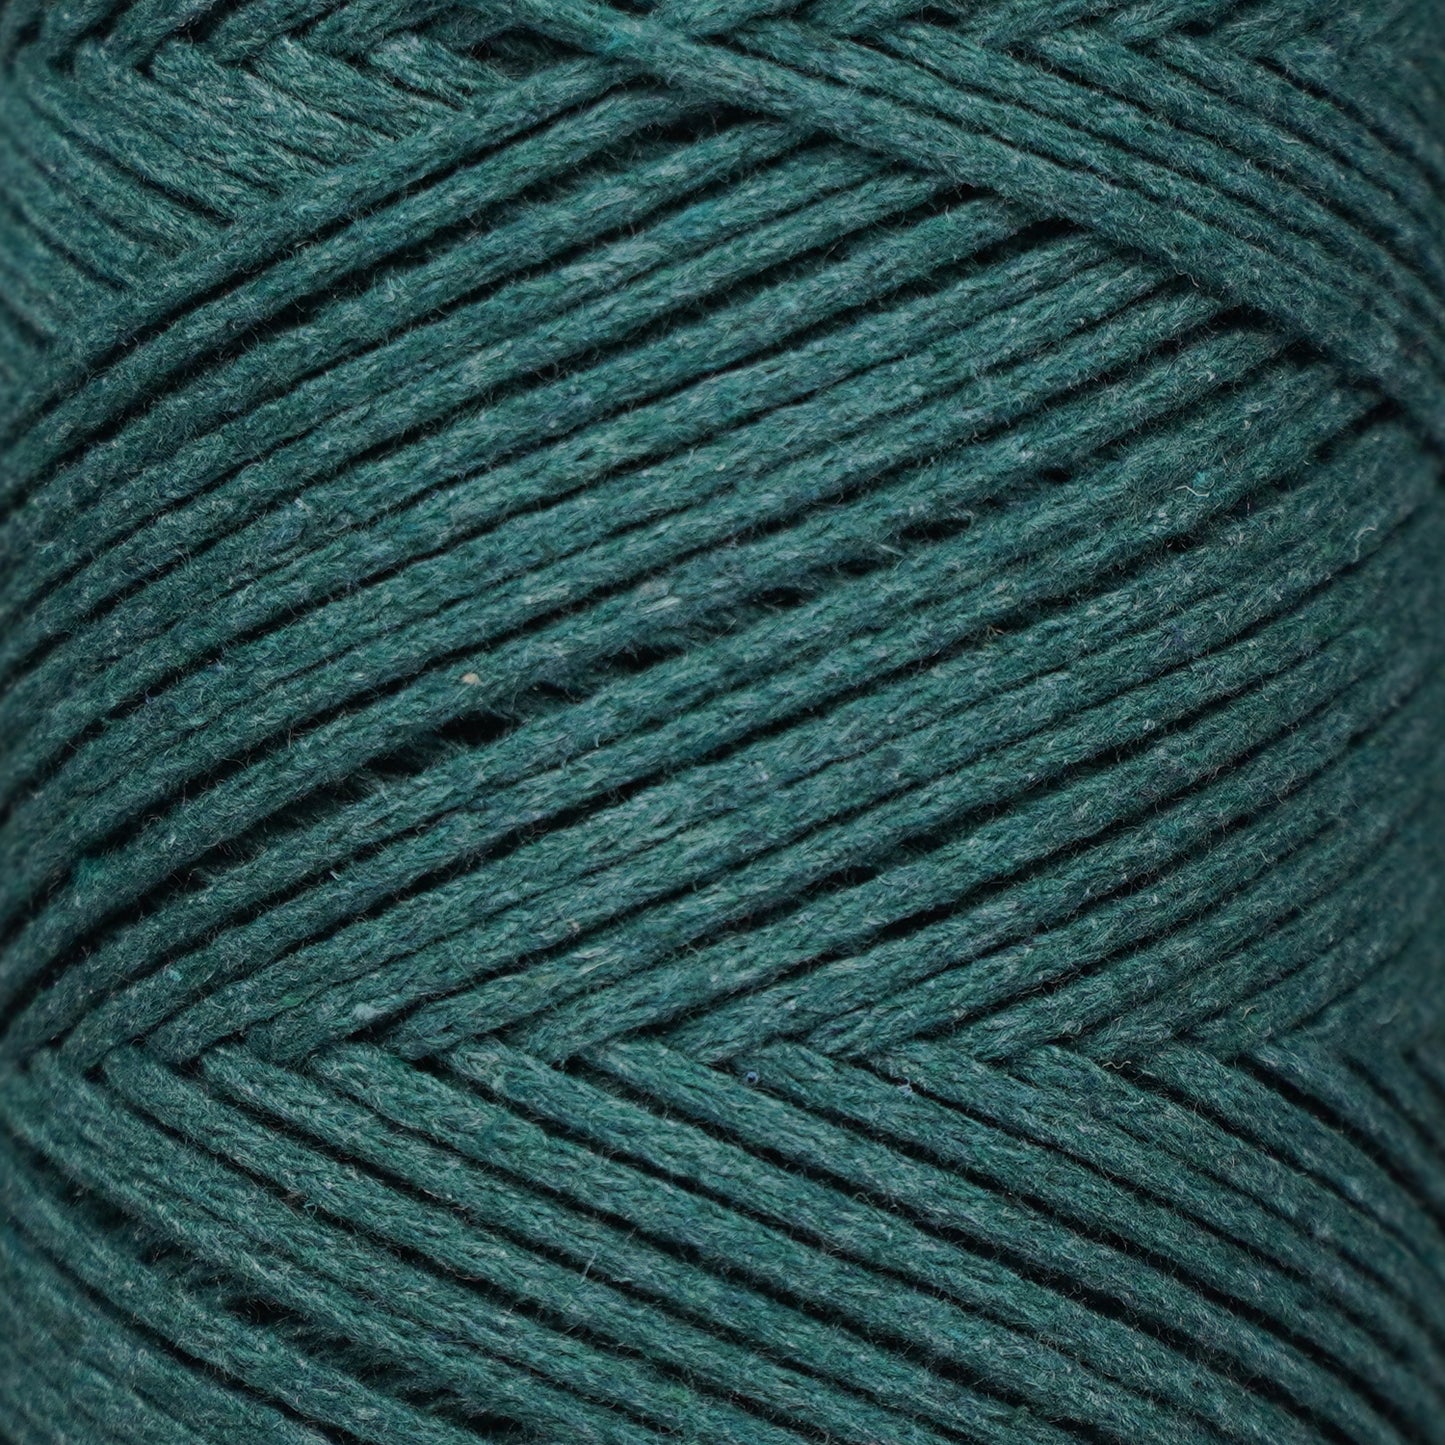 Cotton Macrame Cord 2mm x 195 Yards (590 feet) 2mm - Forest Green